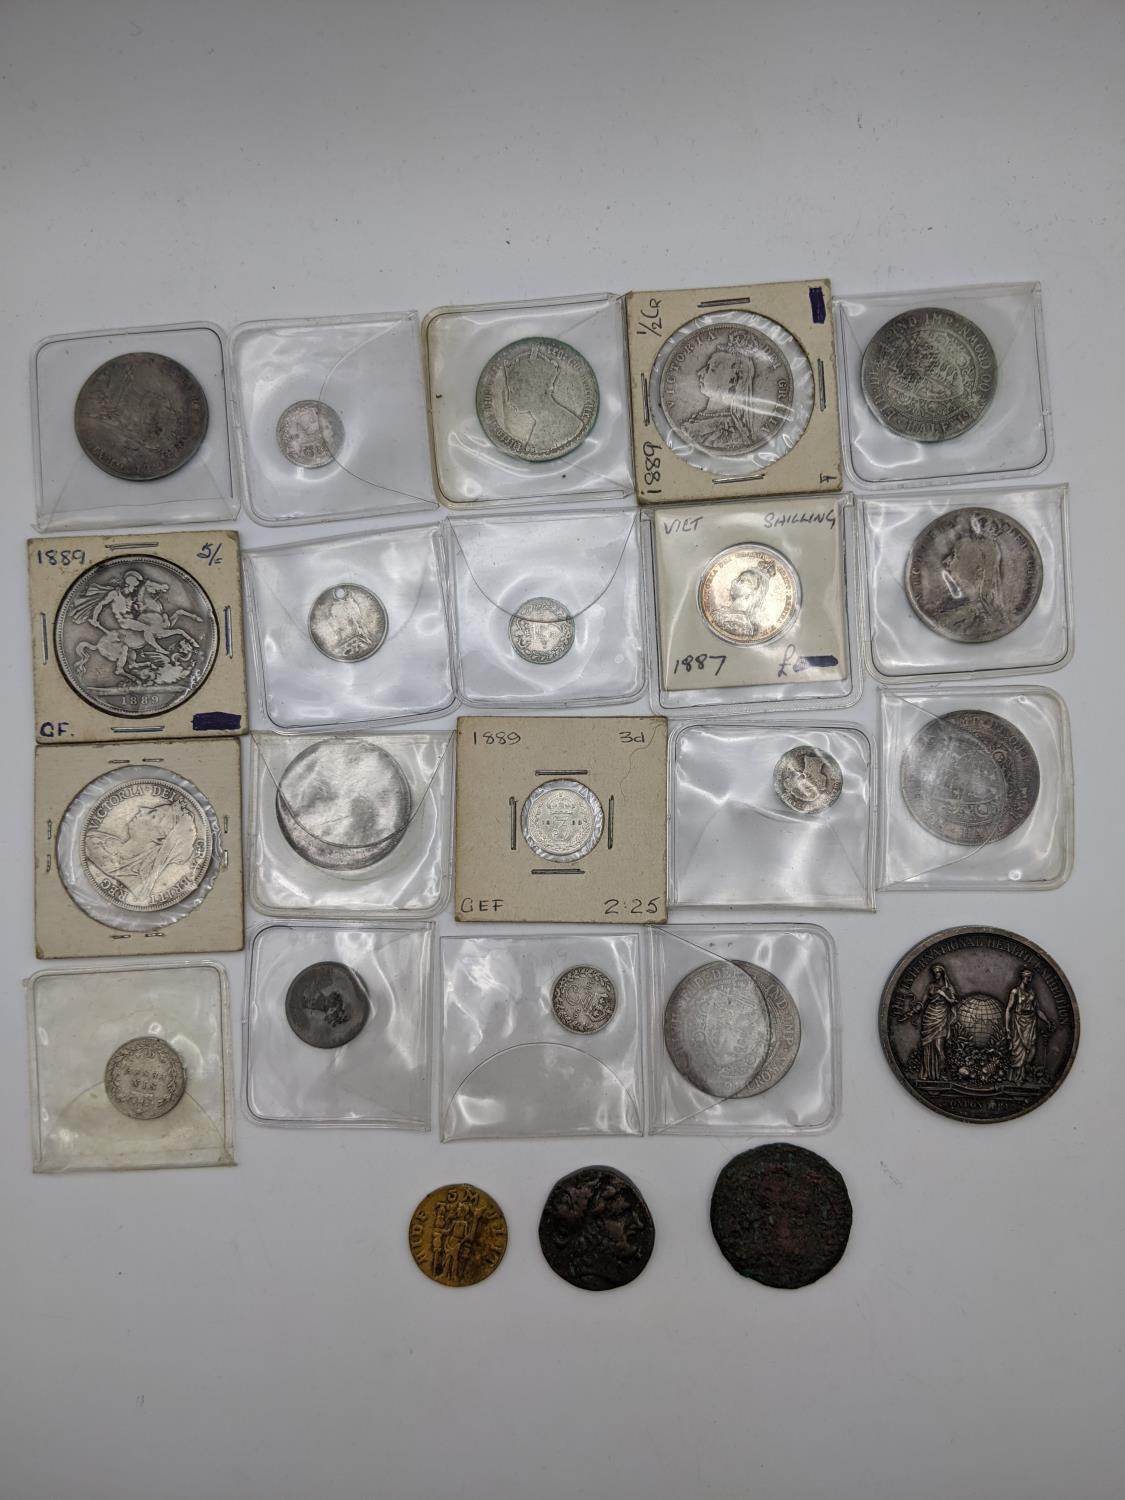 Victoria silver coinage to include an 1889 crown, 1859 Gothic Florin, half crowns 1889-1891, 1896, - Image 2 of 3